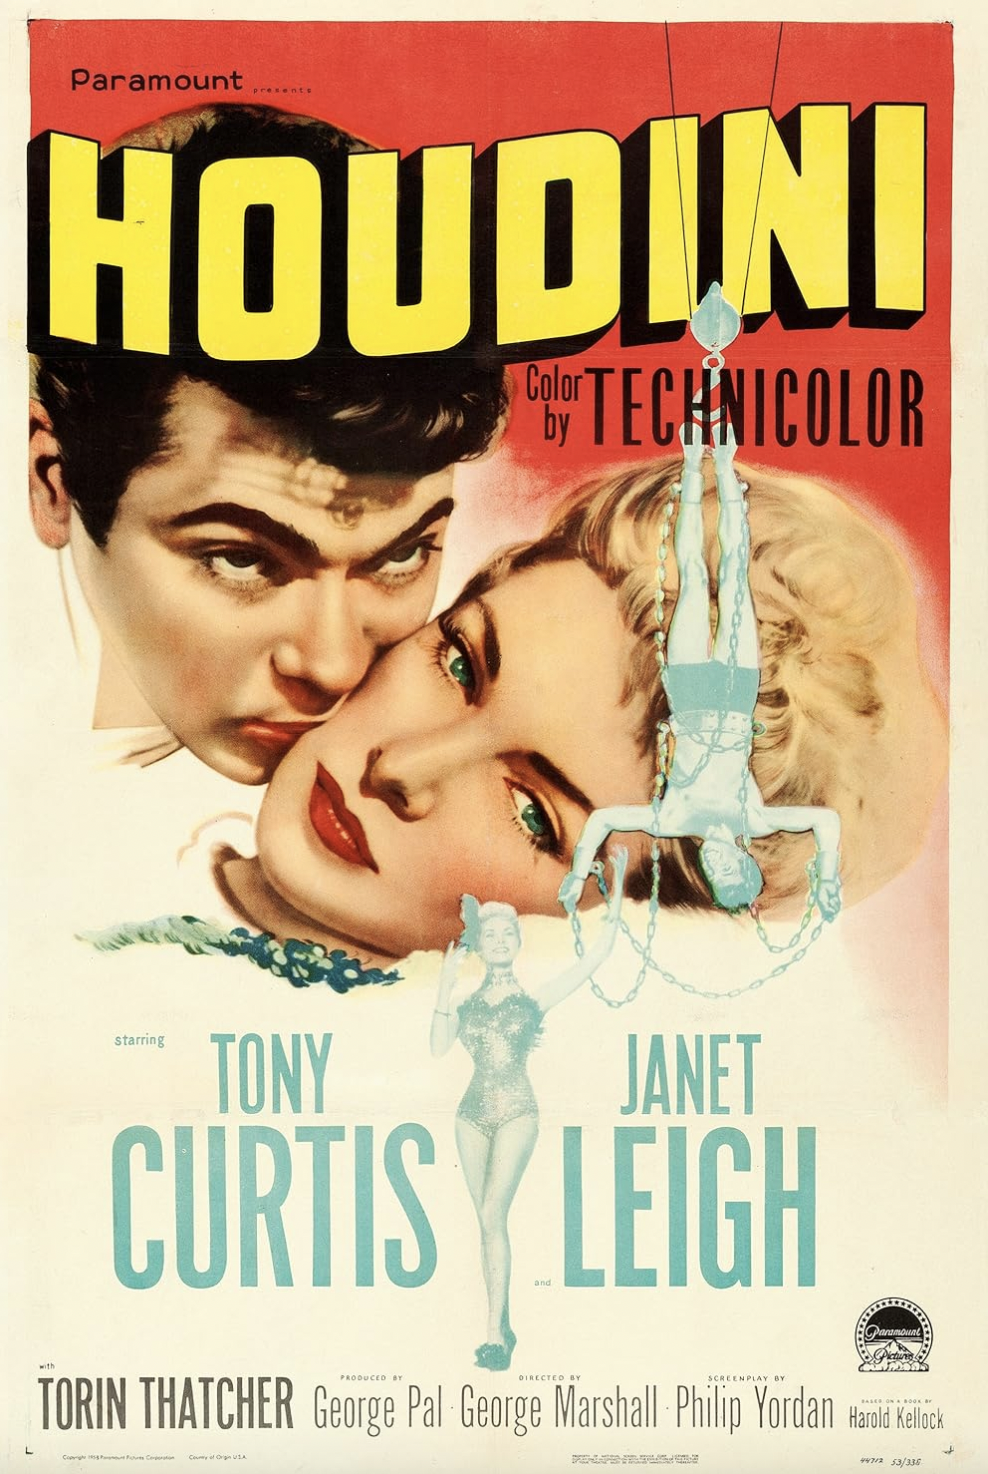 houdini 1953 mov ie poster - Paramount Houdini Technicolor Tony Janet Curtis Y Leigh Torin Thatcher George Pal George Marshall Philip Yordan K